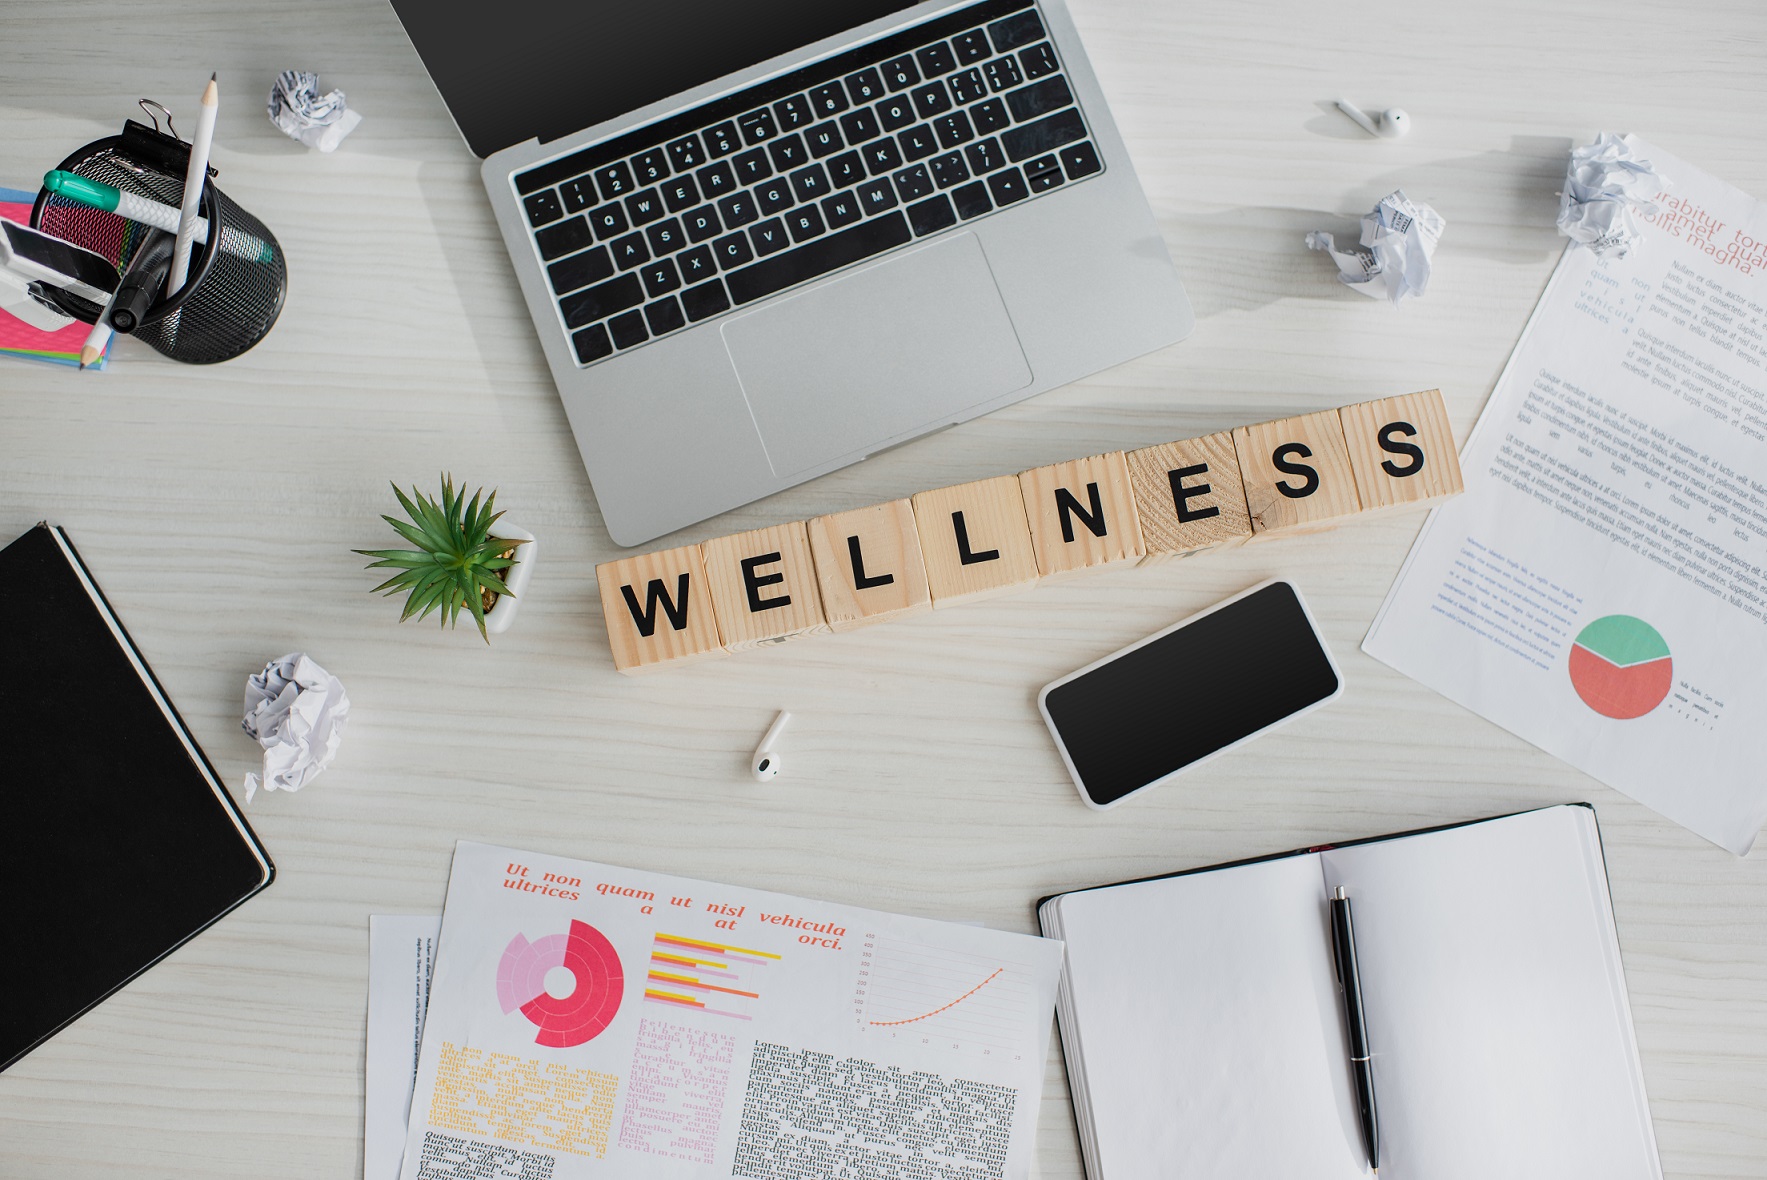 Wellbeing at work, wellness in office, mental and physical health 